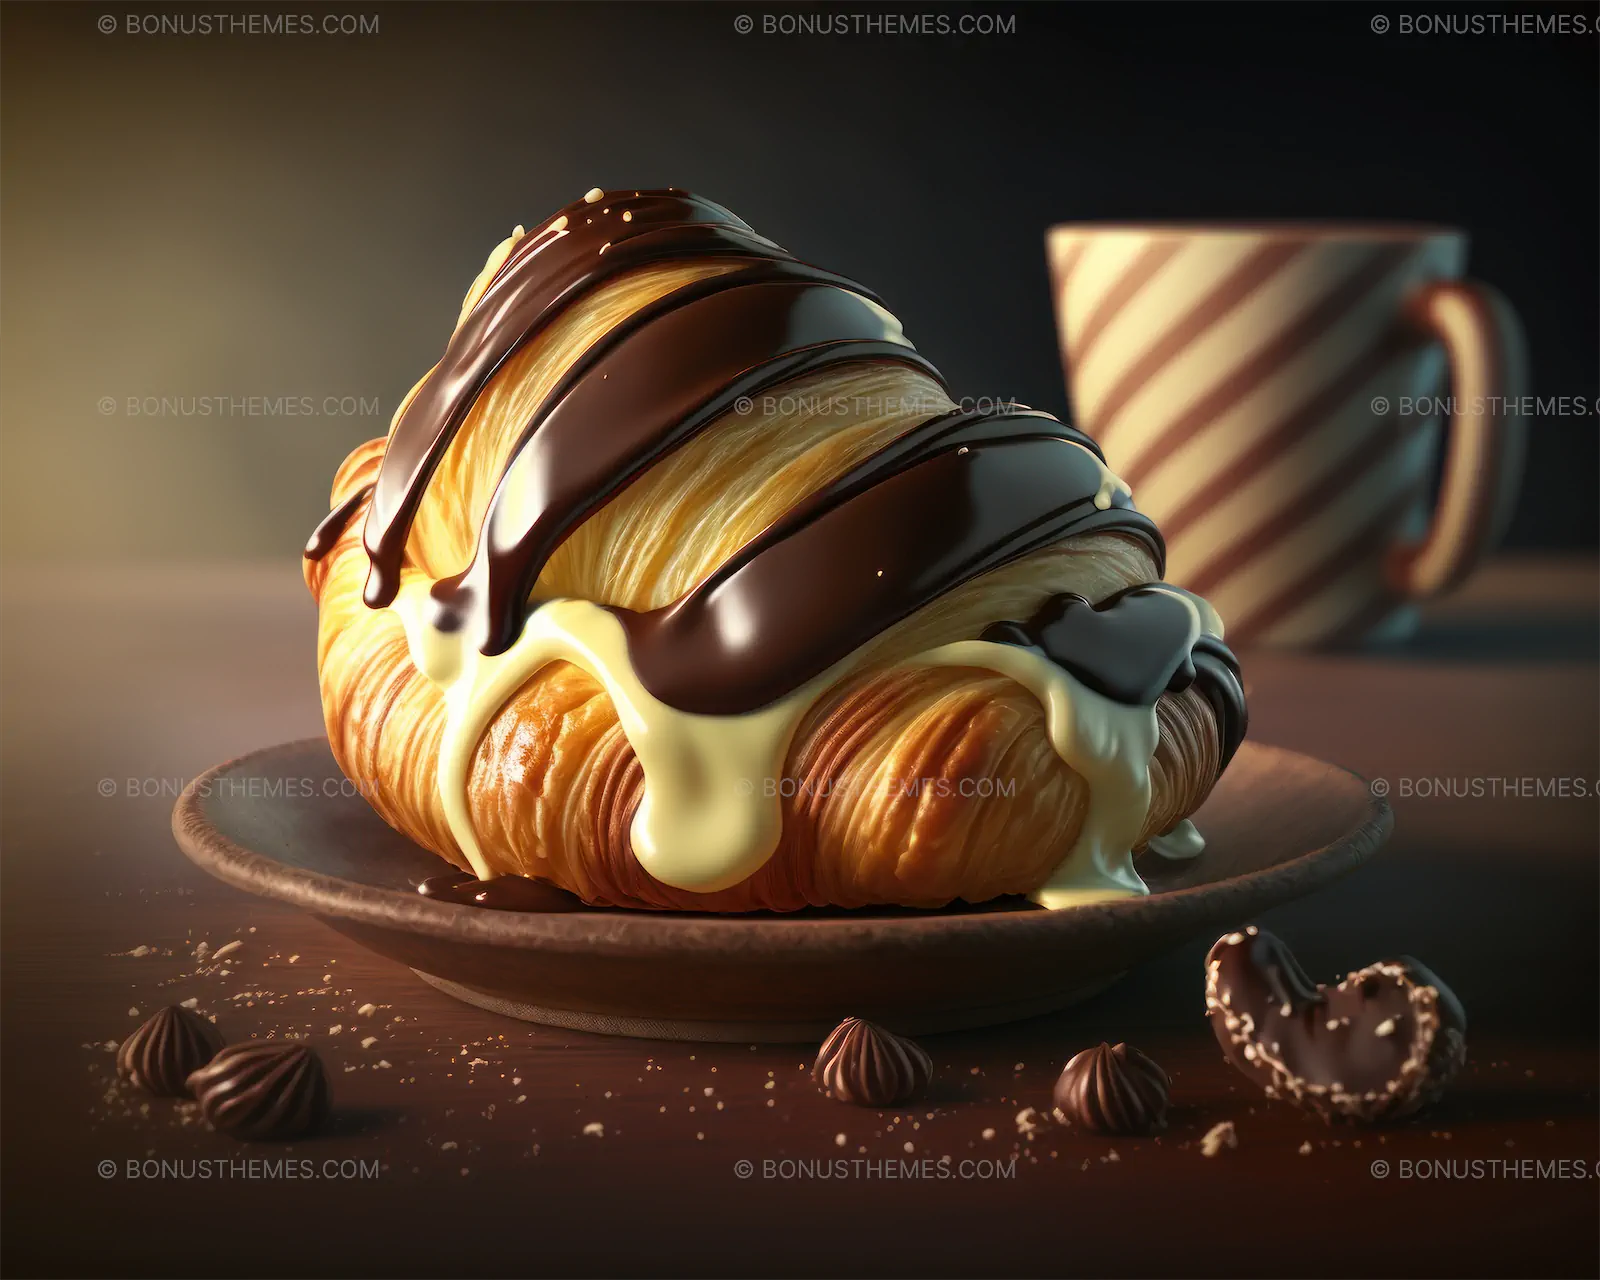 A stuffed croissant of pastry cream, top stripes of chocolate syrup